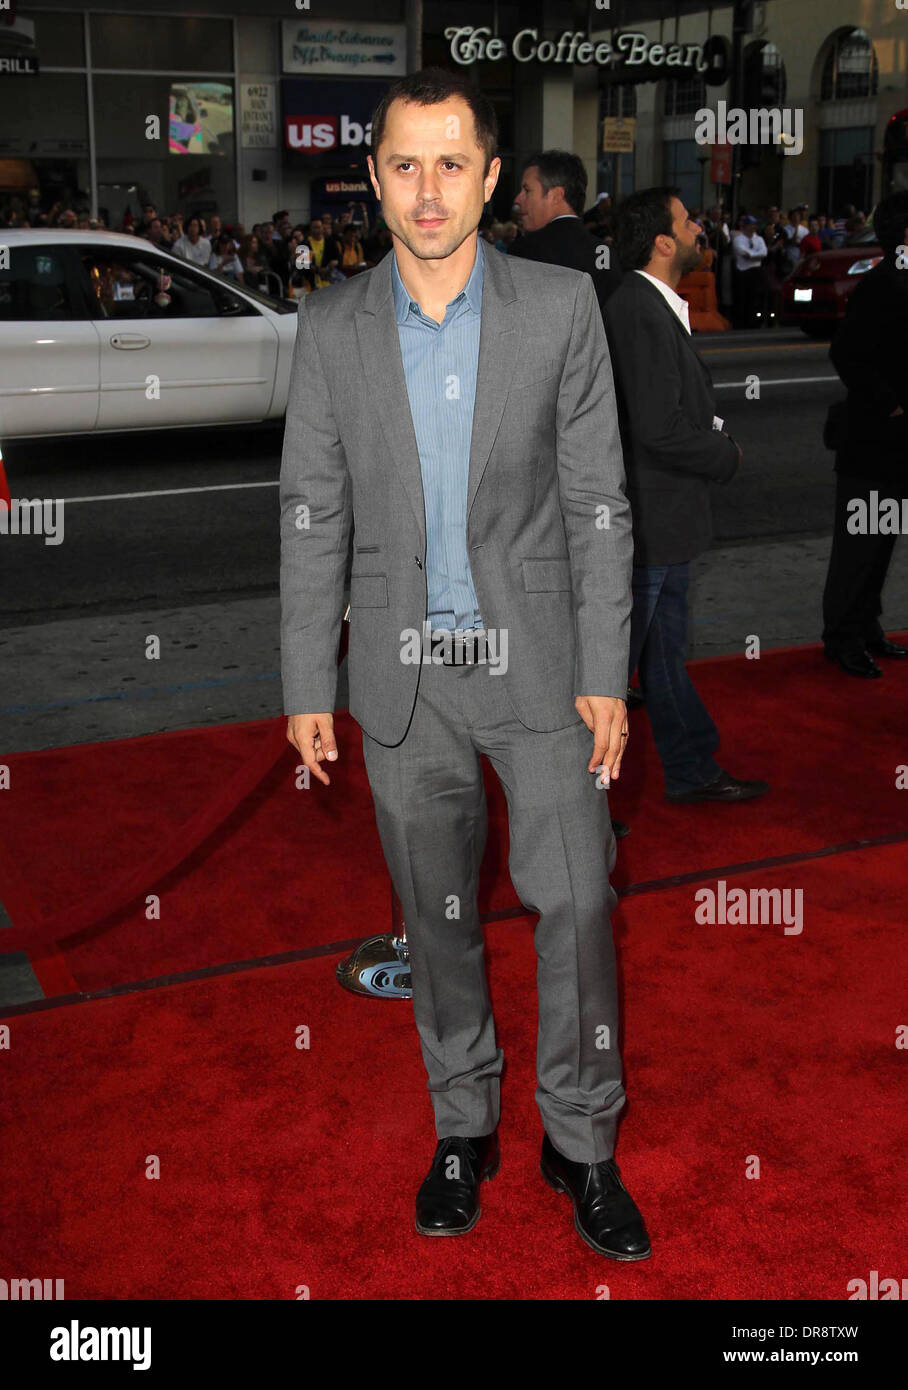 Giovanni Ribisi The Los Angeles Premiere 'Ted' at Grauman's Chinese Theatre - Arrivals Los Angeles, California - 21.06.12 Stock Photo